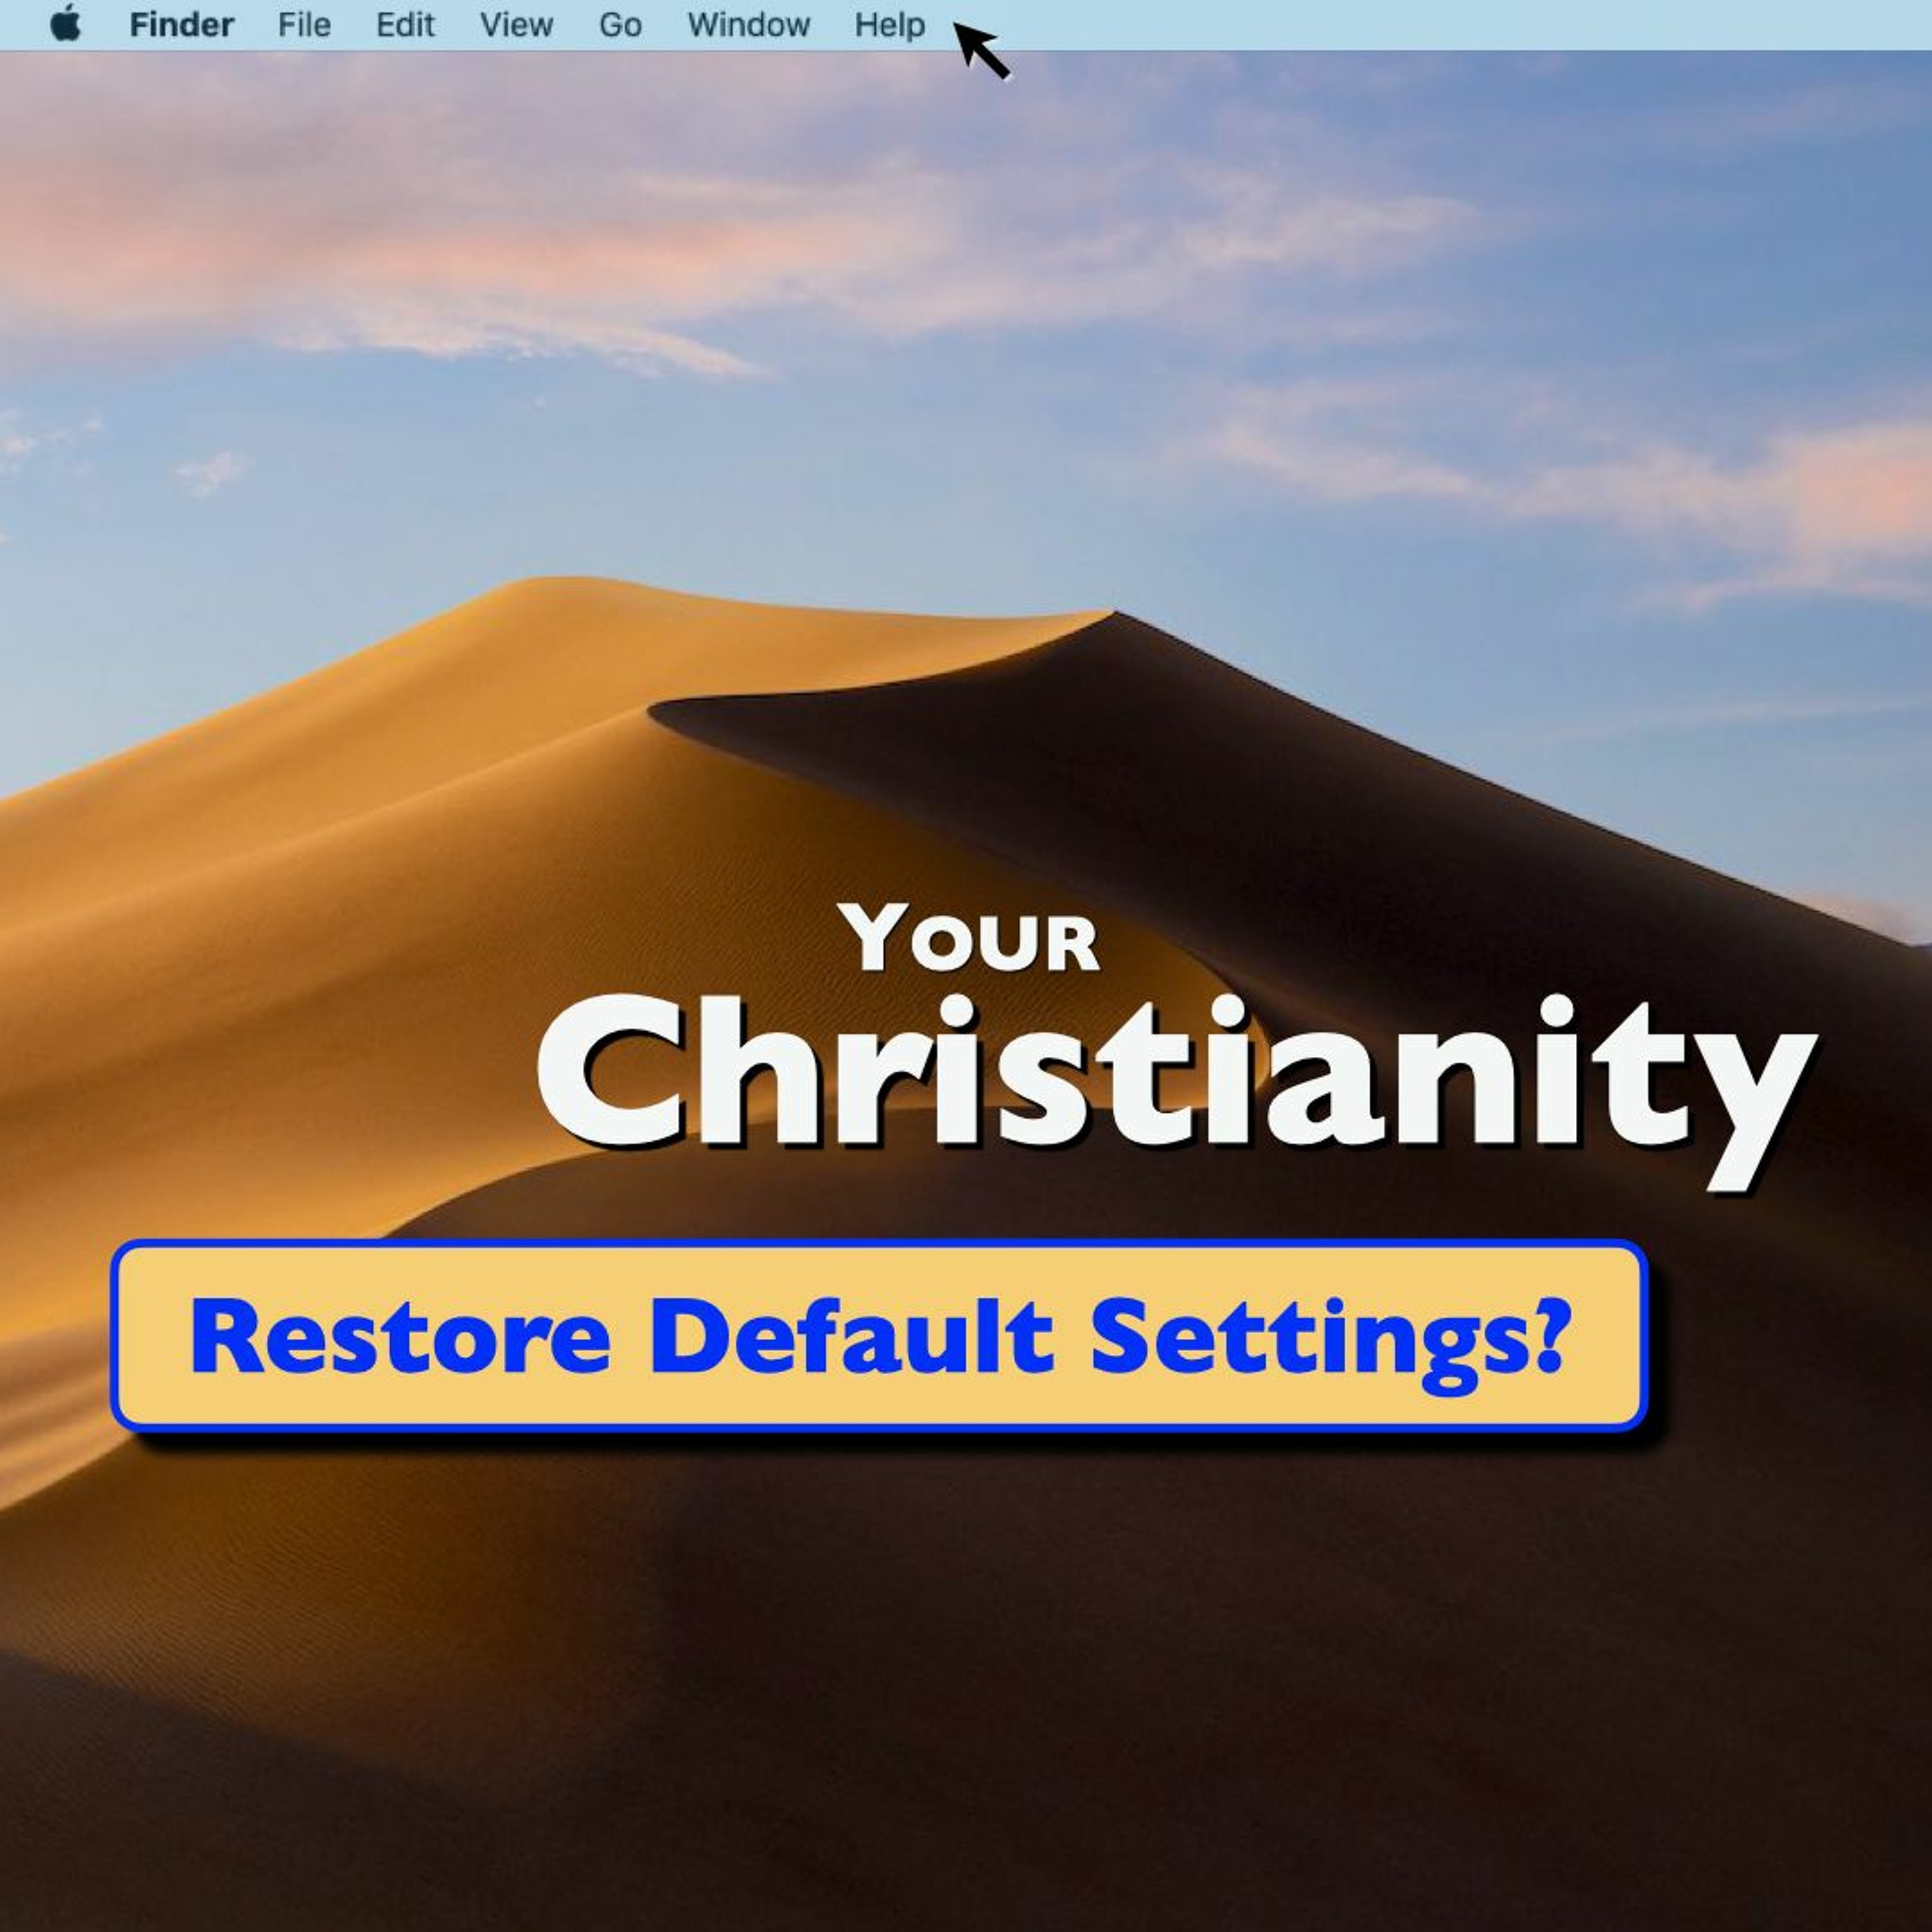 7-5-20 Your Christianity: Restore Default Settings?